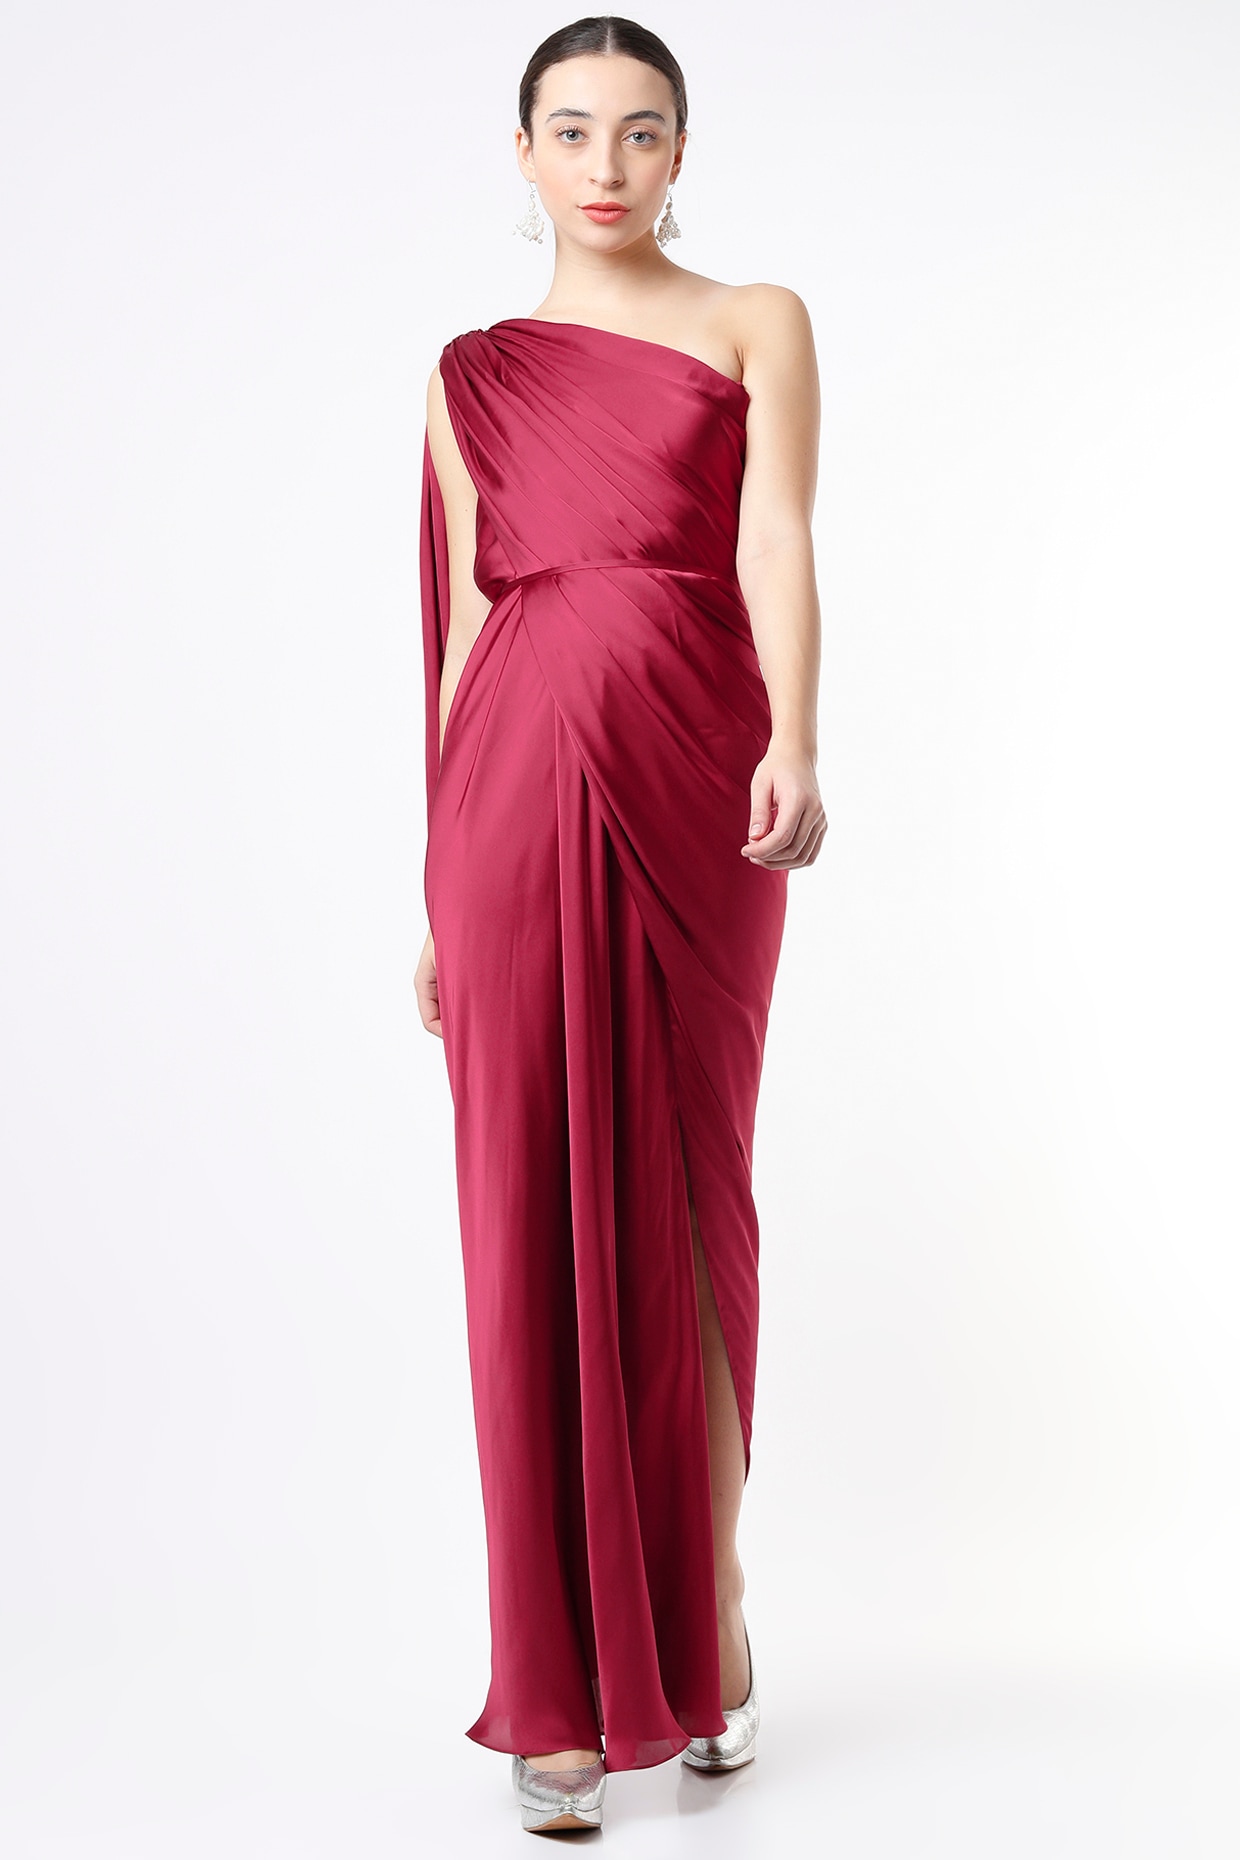 Shop Red One-Shoulder Embellished Drape Dress by AAKAAR at House of  Designers – HOUSE OF DESIGNERS